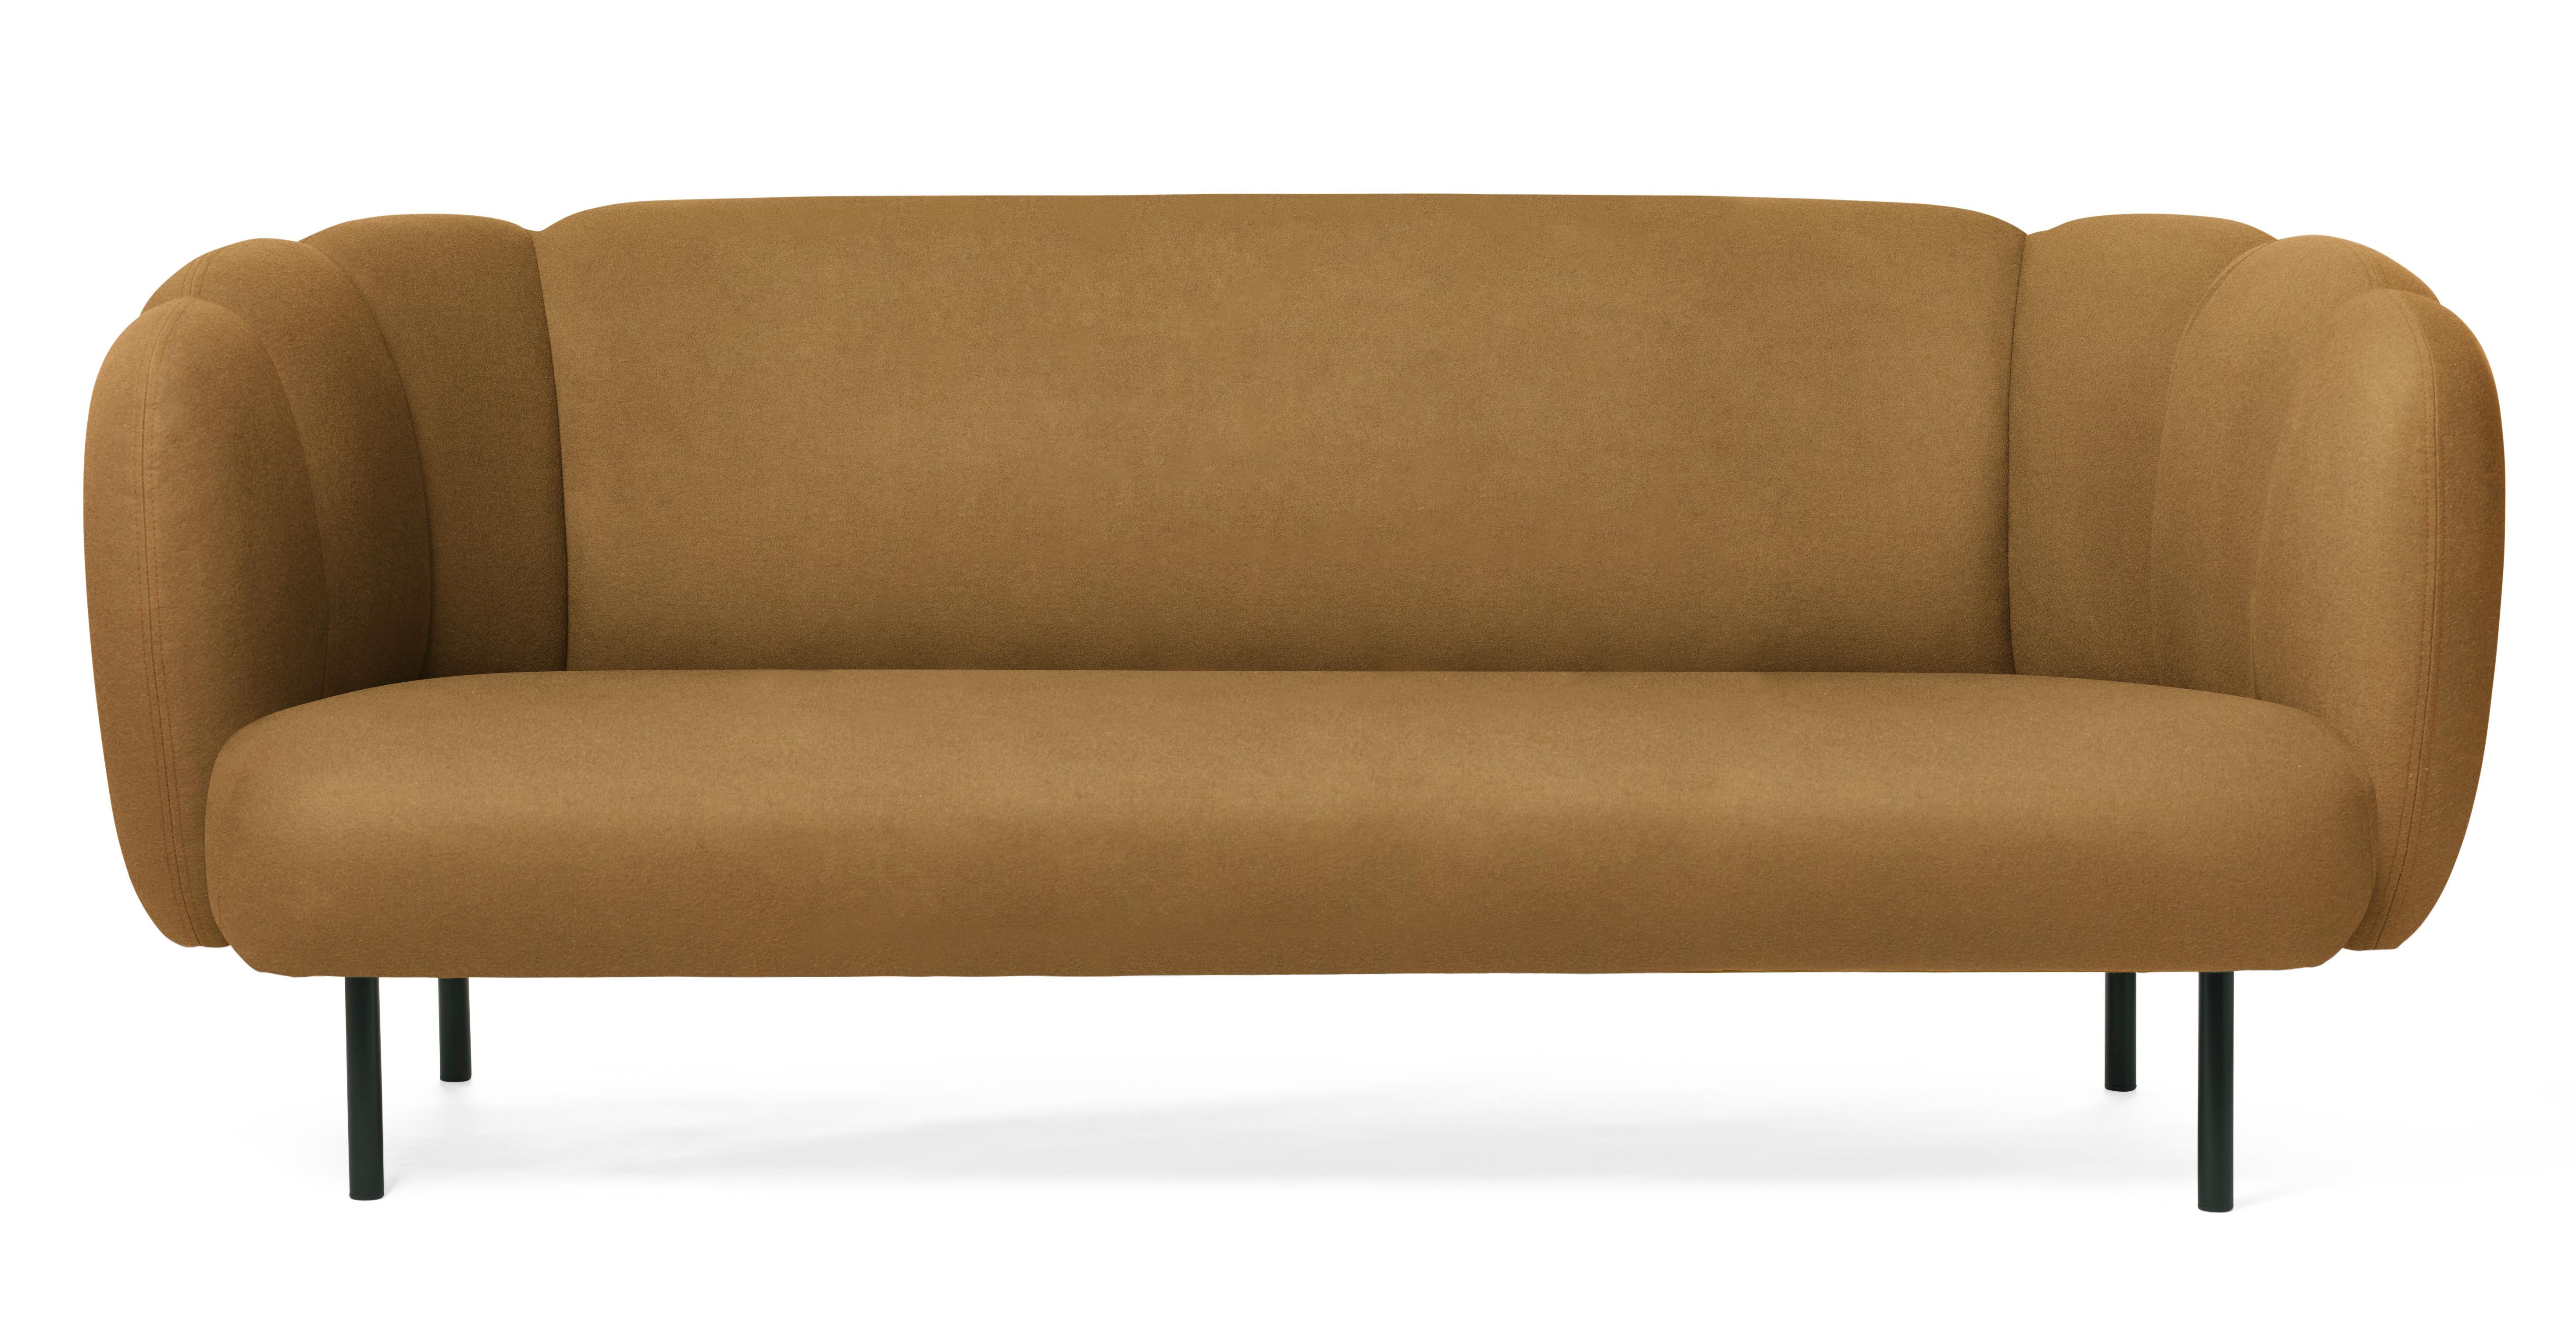 For Sale: Green (Hero 981) Cape 3-Seat Stitch Sofa, by Charlotte Høncke from Warm Nordic